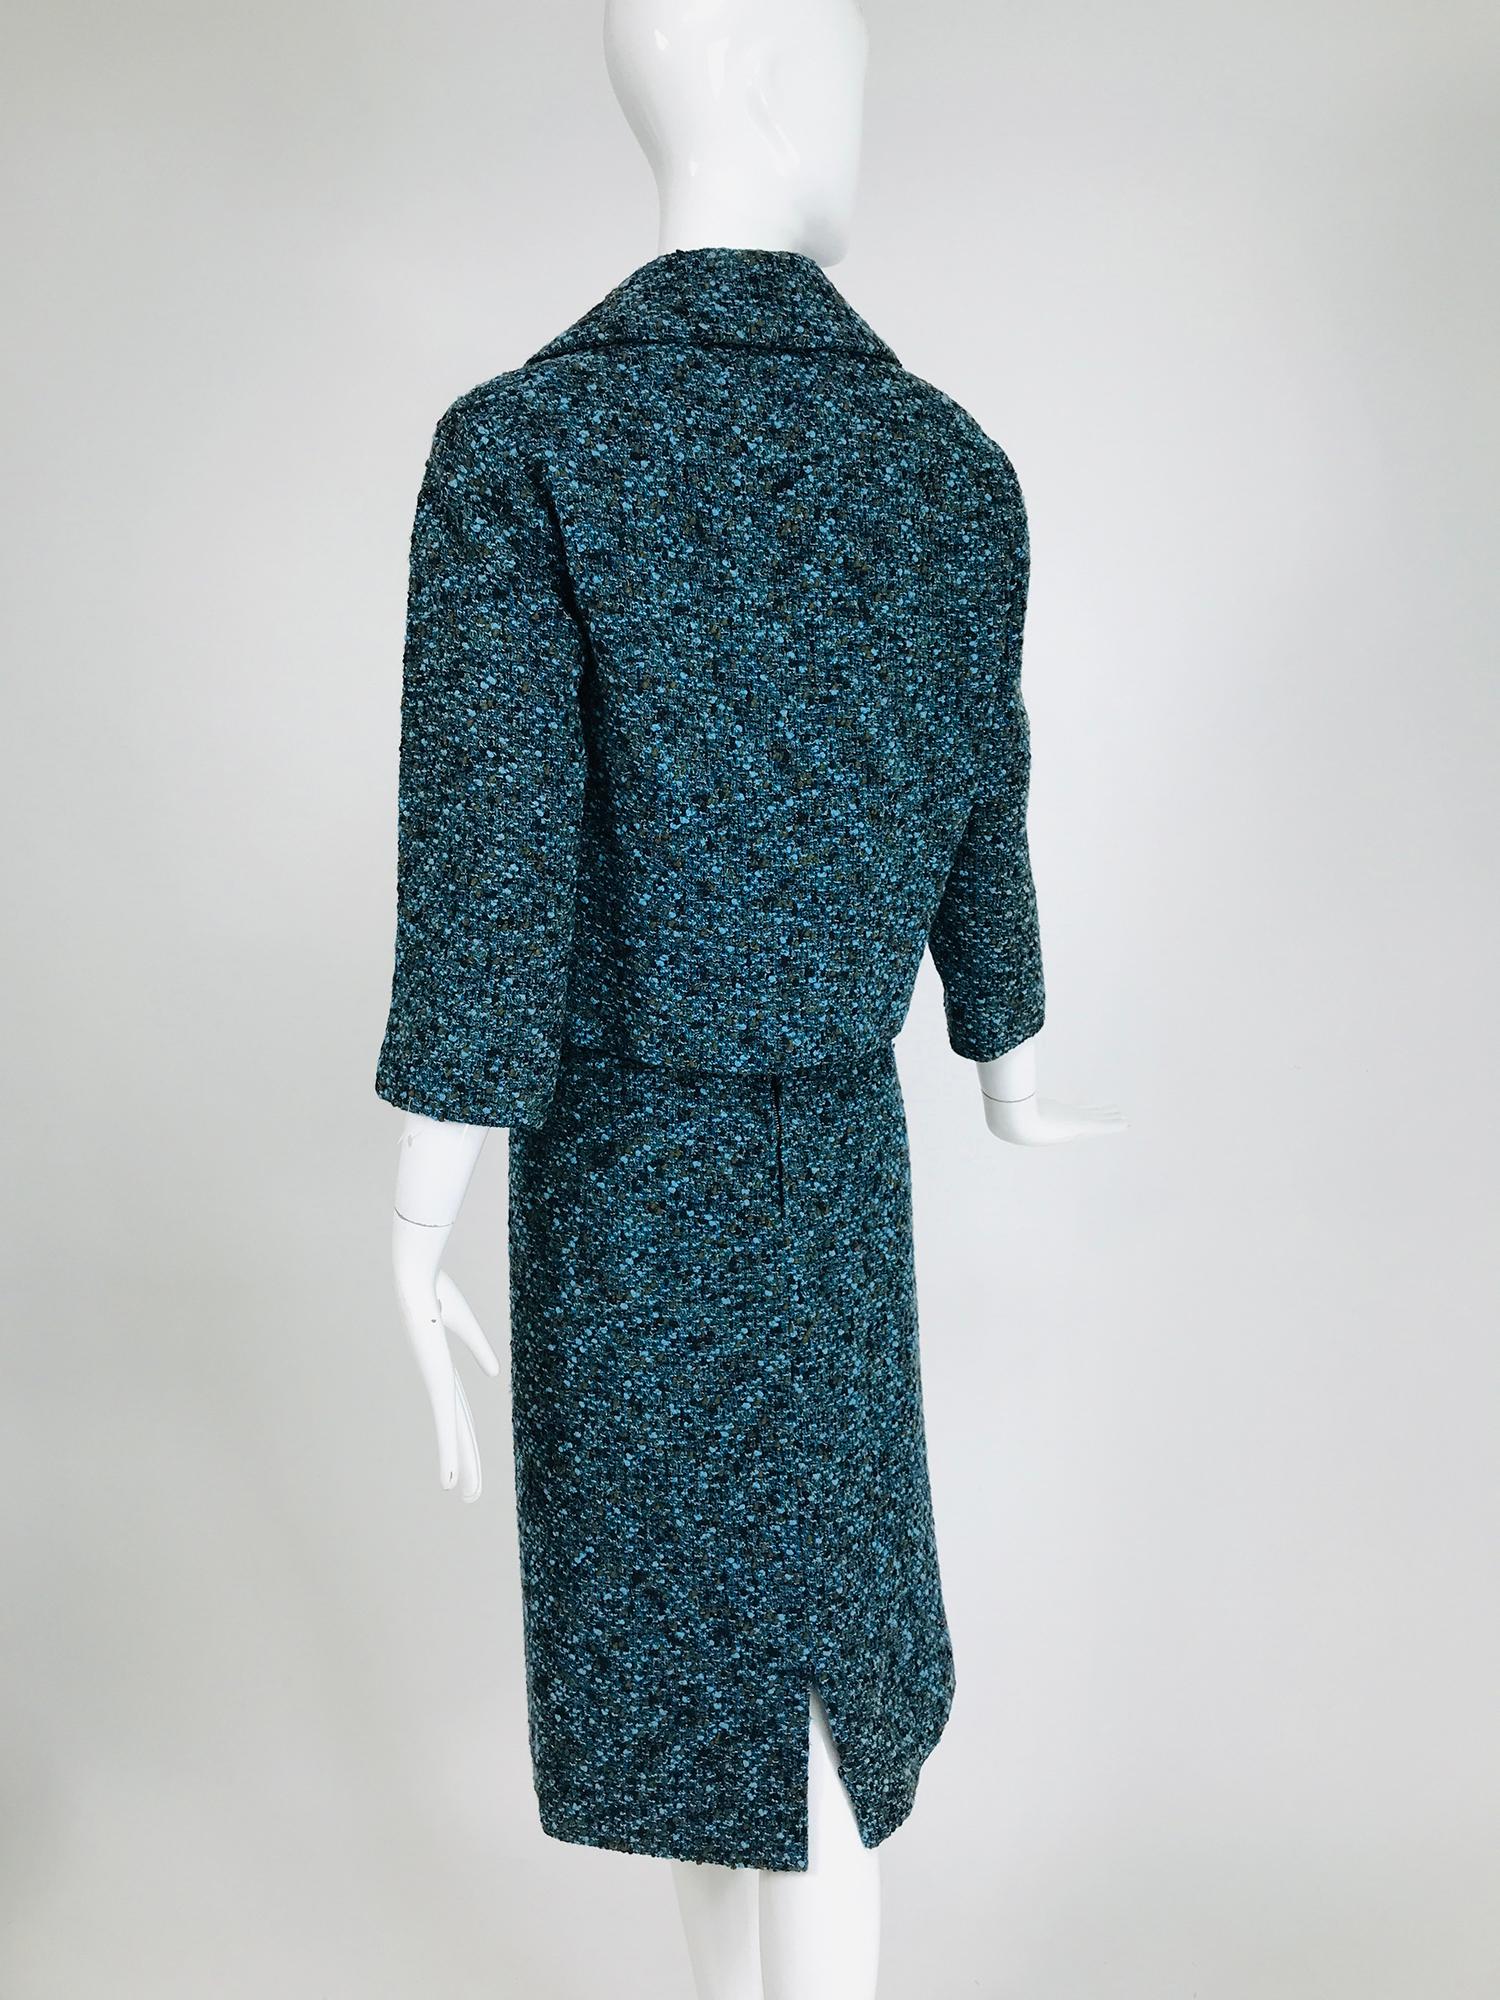 Women's Jeanne Lanvin Numbered Couture Early 1960s Blue Tweed Skirt Suit  For Sale